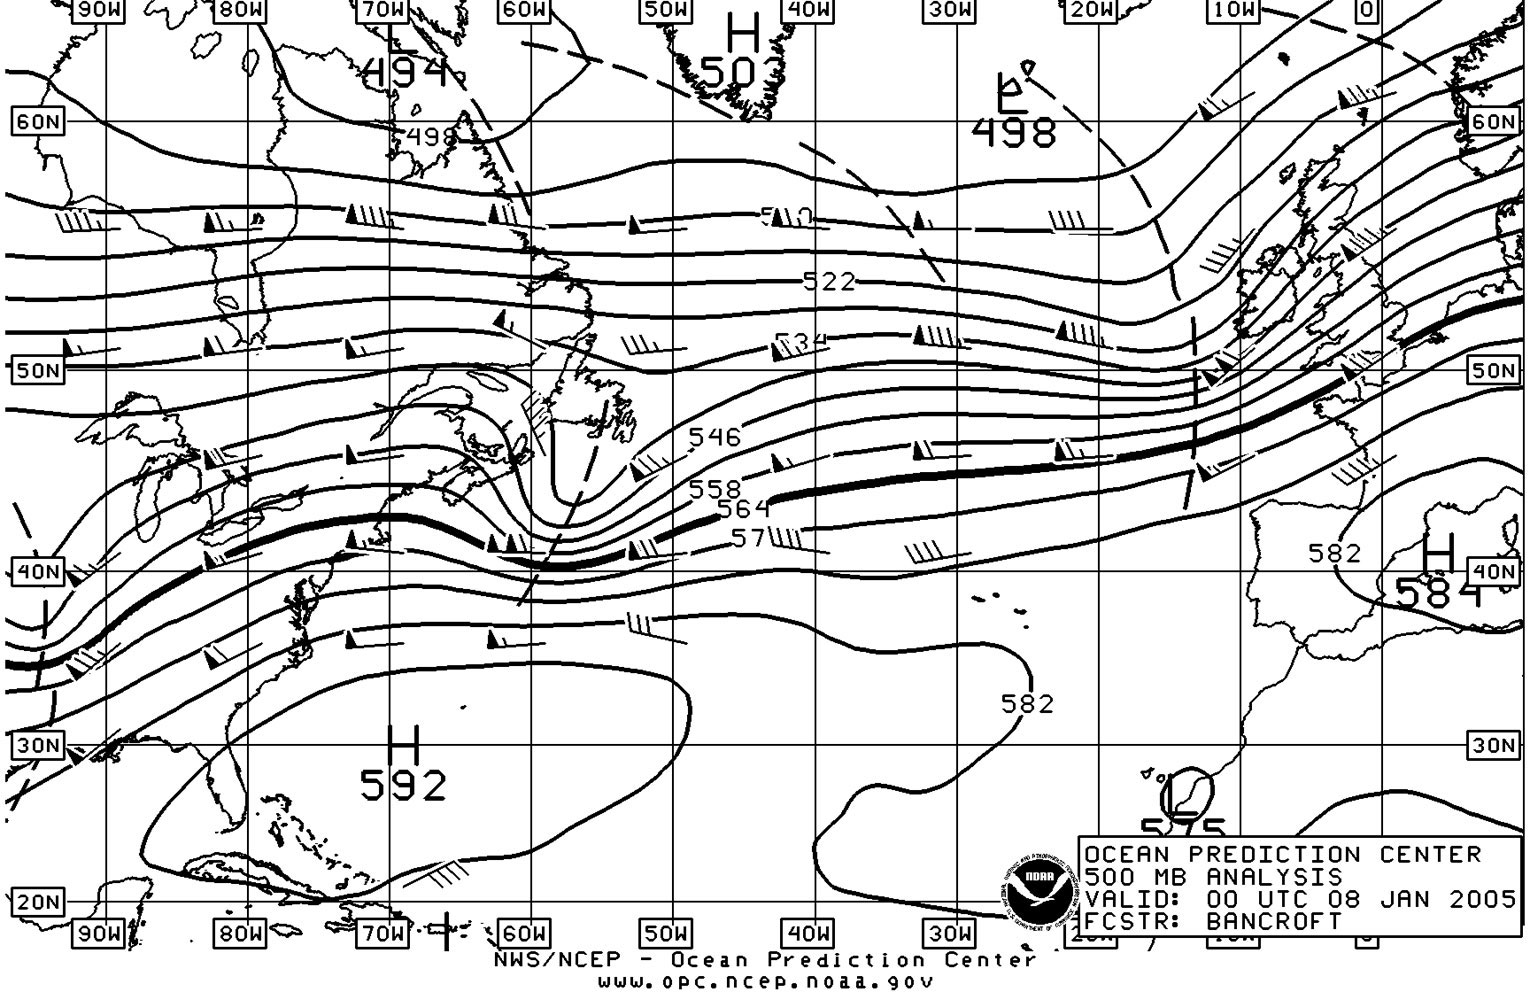 Figure 2. North Atlantic hPa Analysis Chart - Click to Enlarge